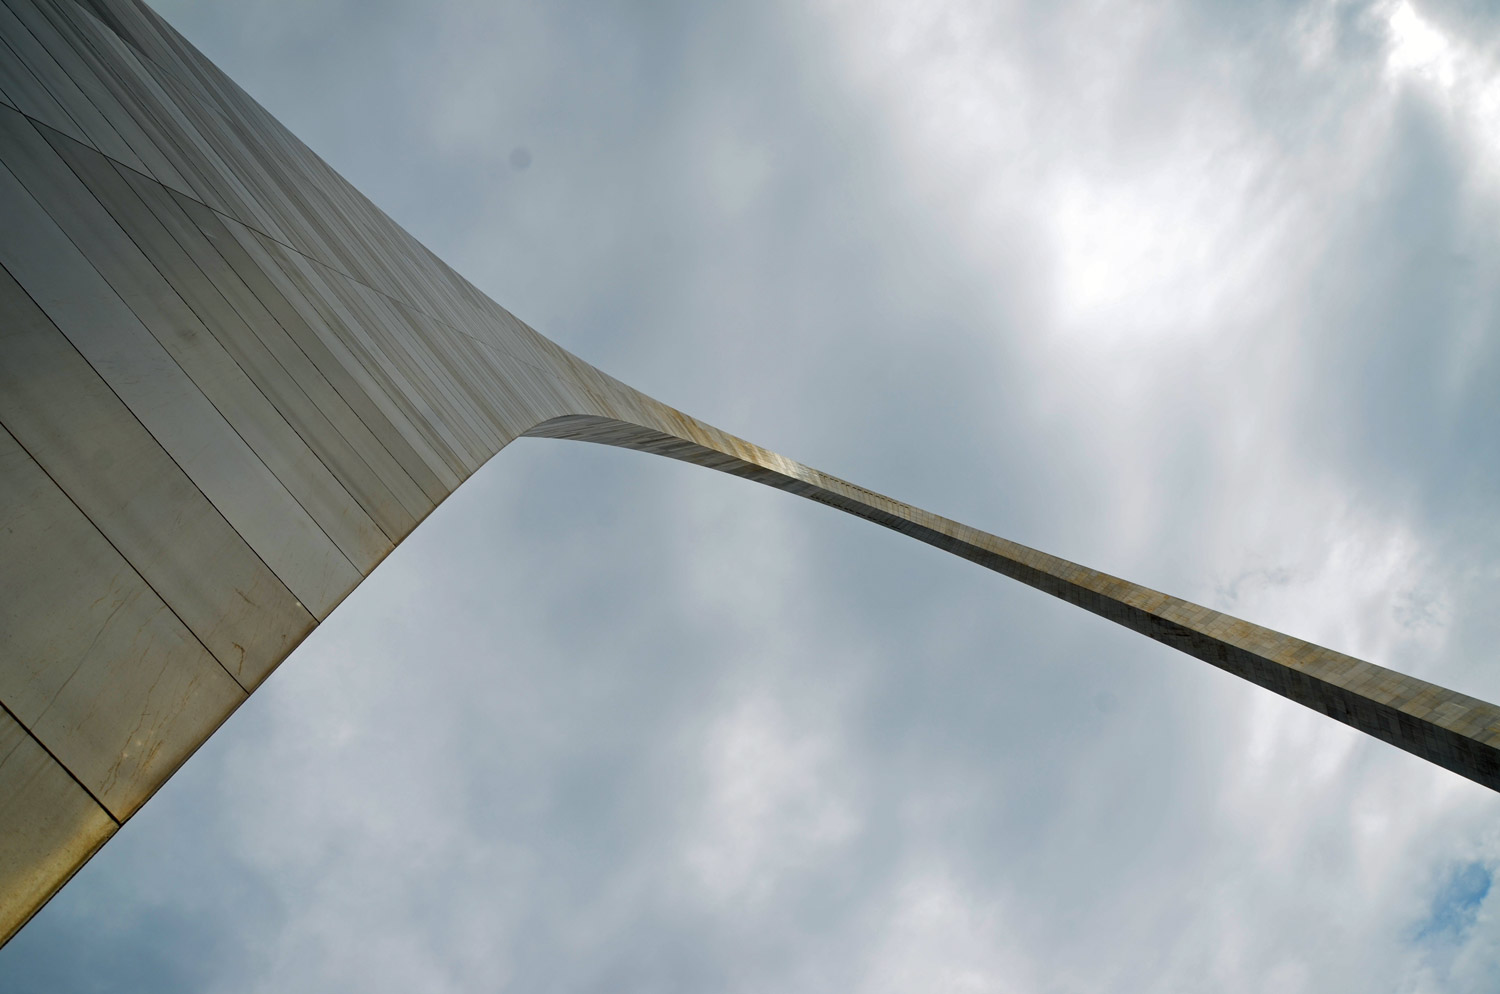 The St. Louis Arch, one of many symbols of American exceptionalism. Click on the image for larger view. (© FlaglerLive)